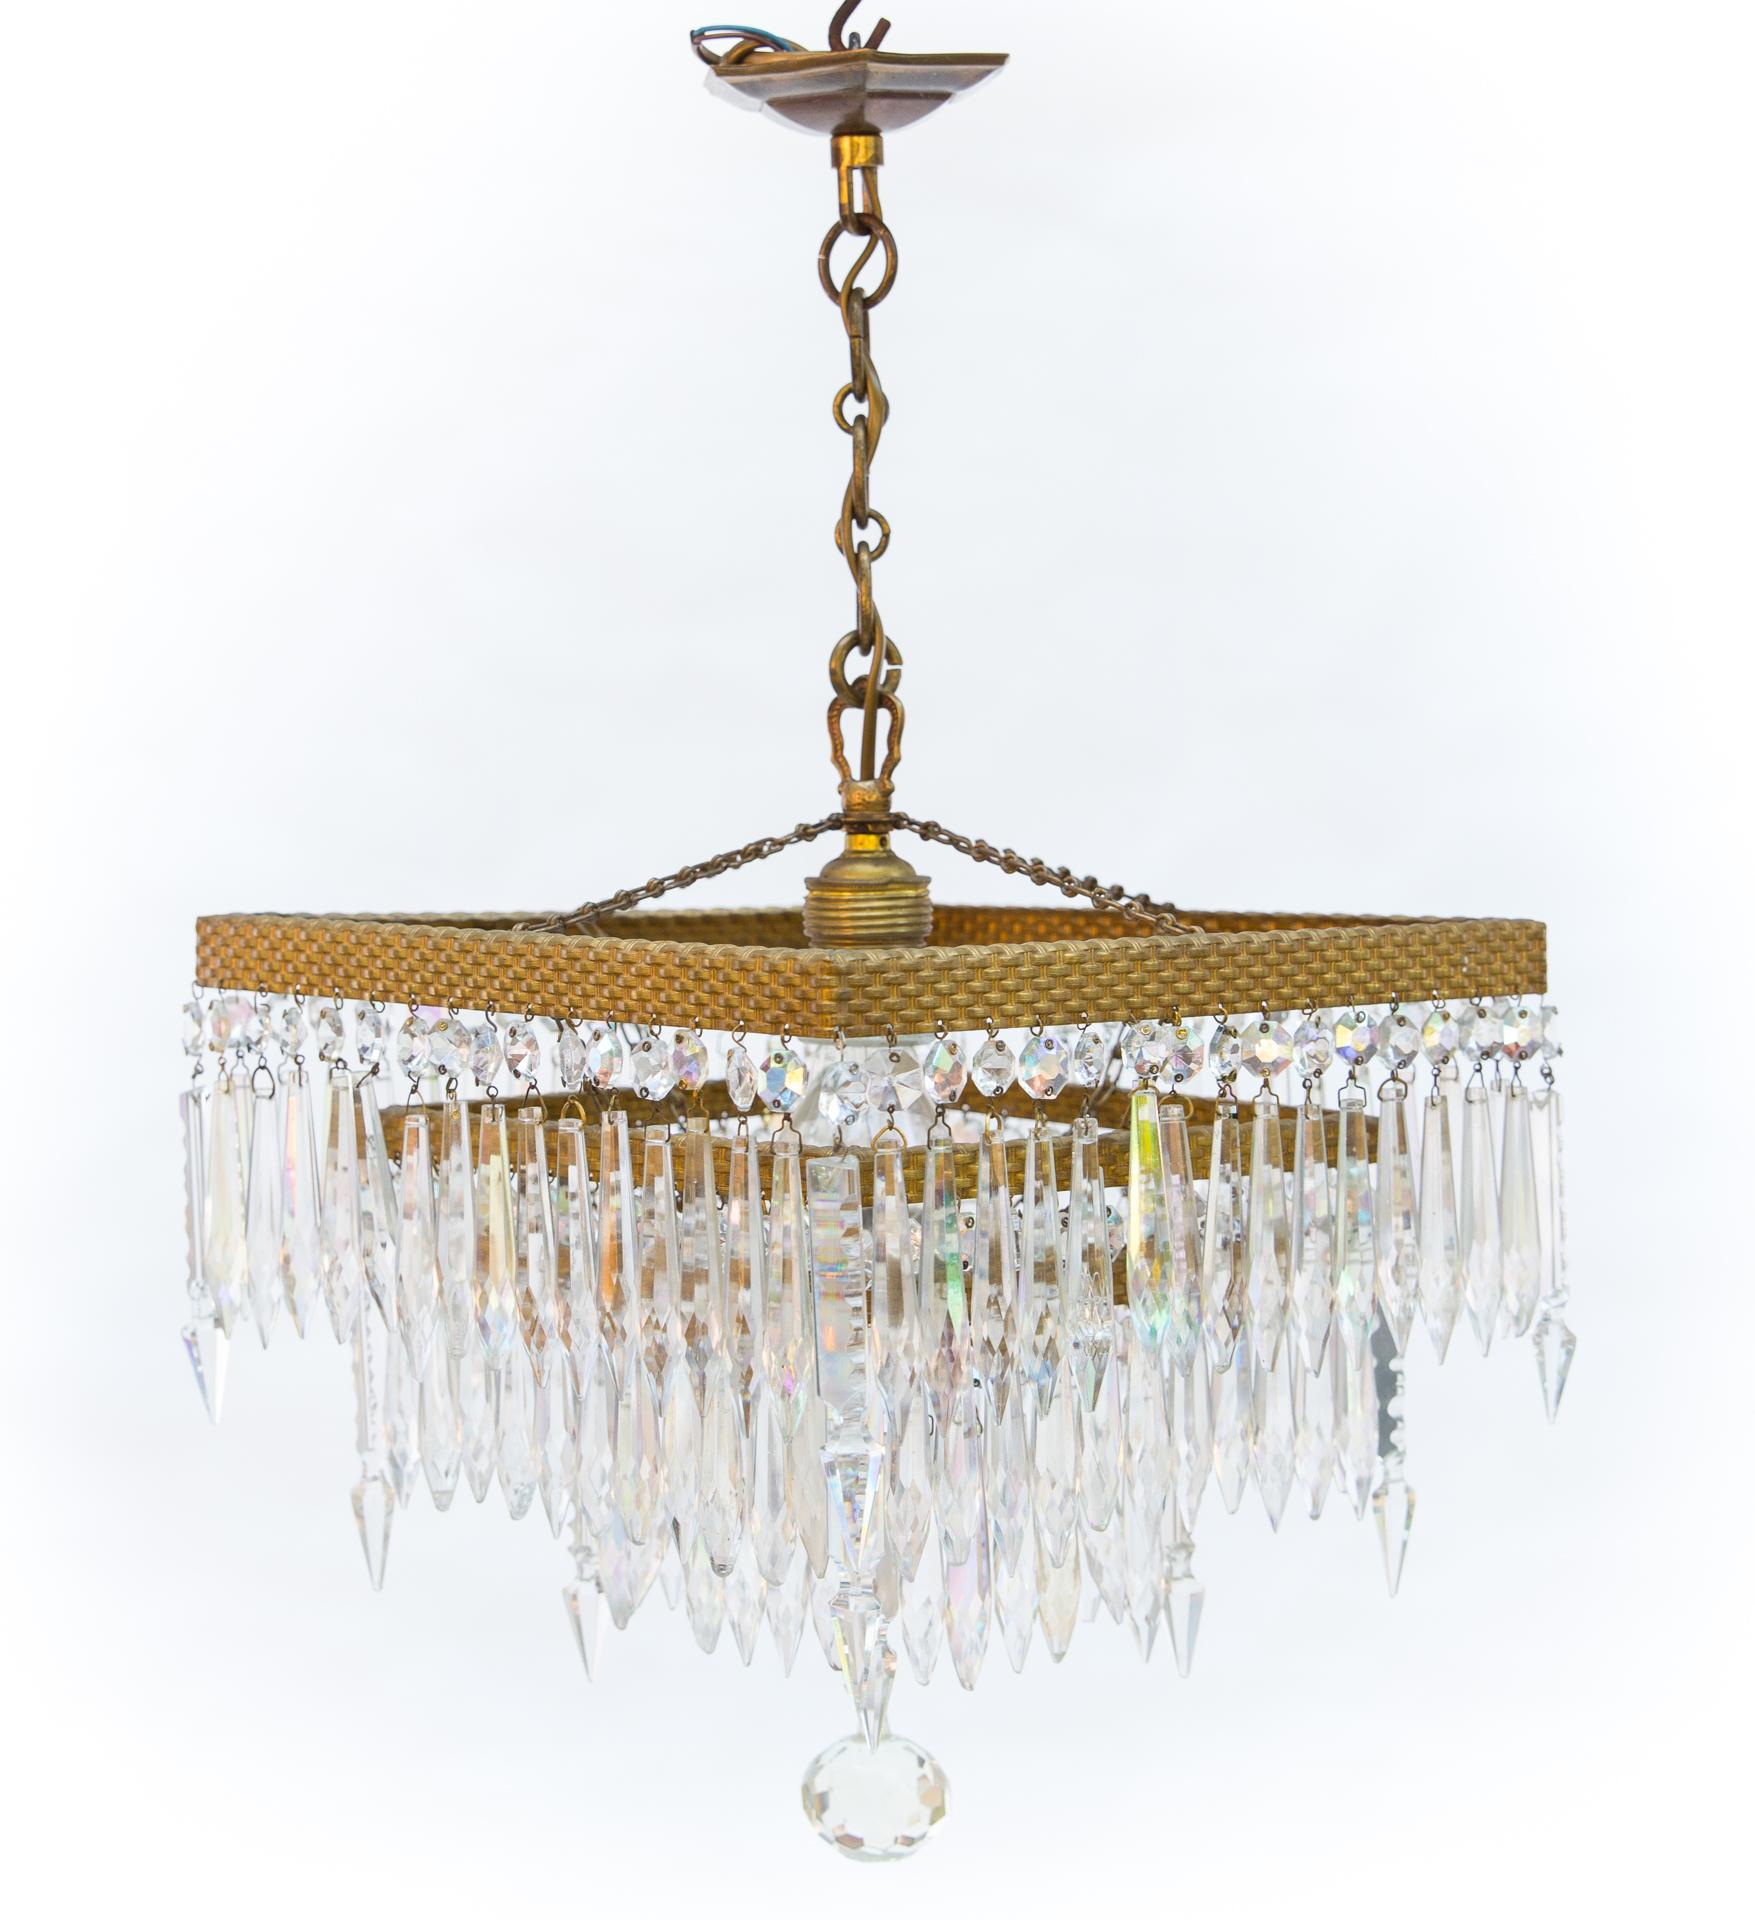 A very interesting and unusual crystal chandelier based on square hoops. Hoops made of a beautiful metal strip, pressed into concave convex braid.

The slats have original, beautiful gilding. Three floors create a dense curtain of crystal, antique